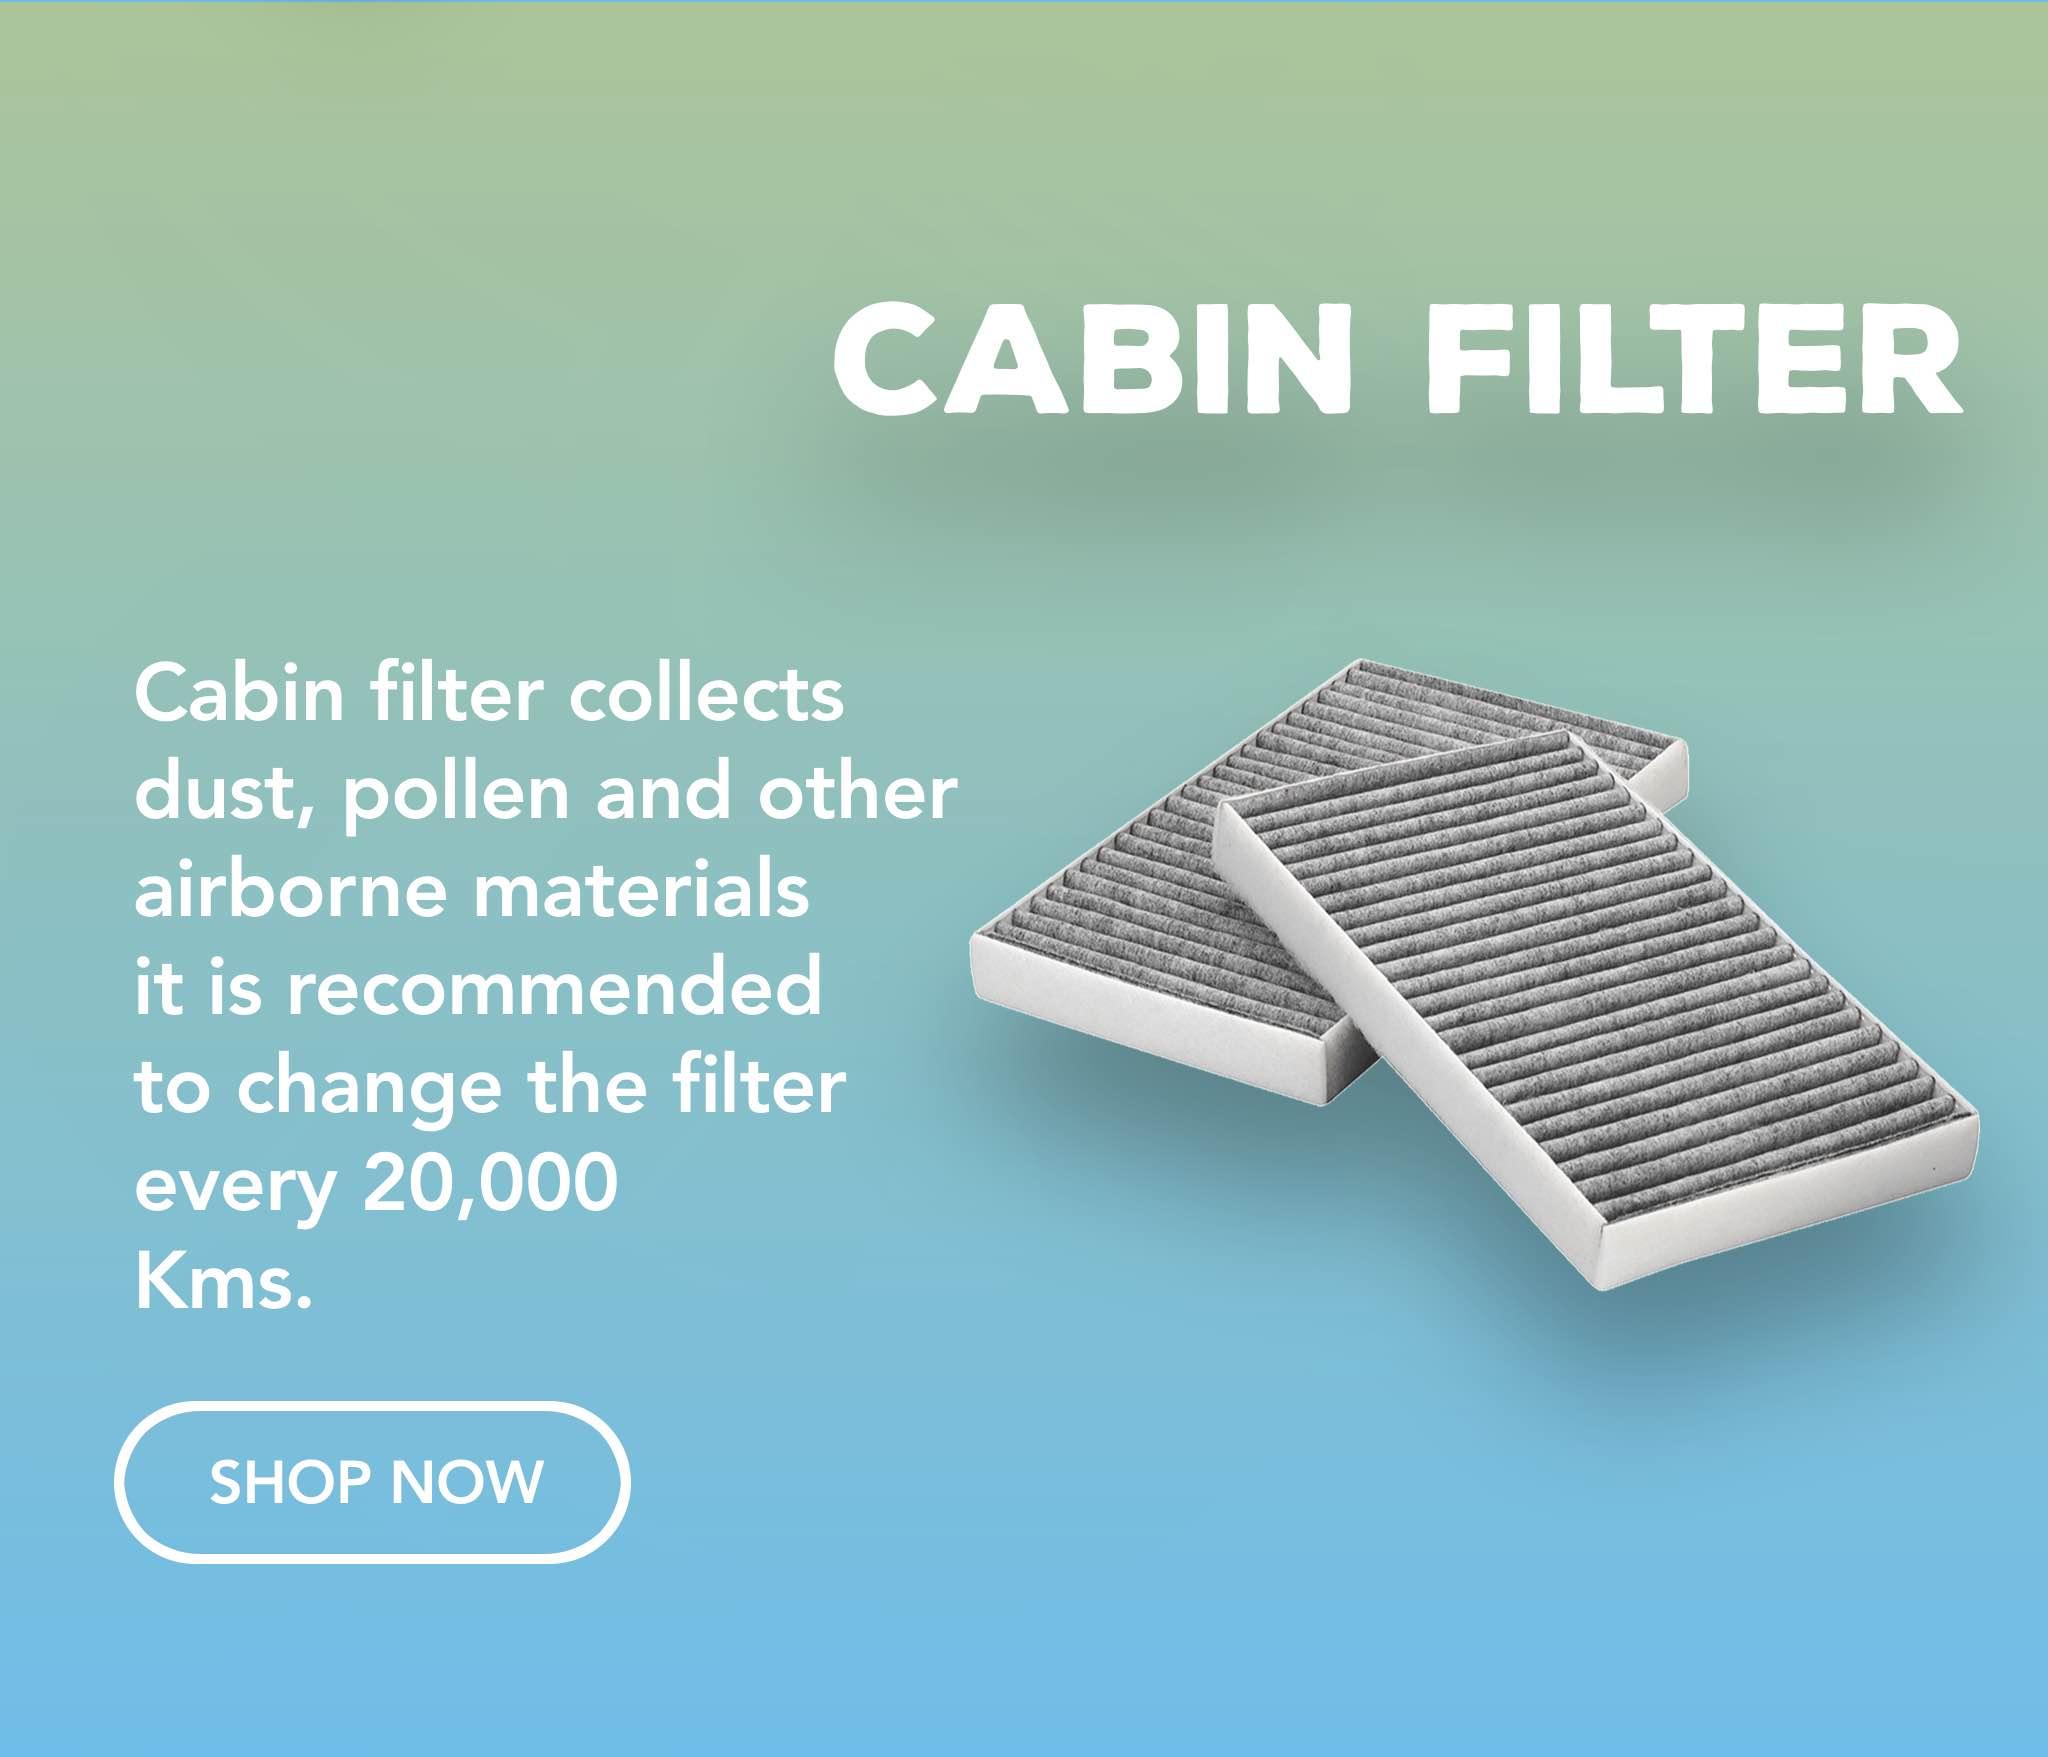 Cabin filter collects dust, pollen and other airborne materials it is recommended to change the filter every 20,000 KM.